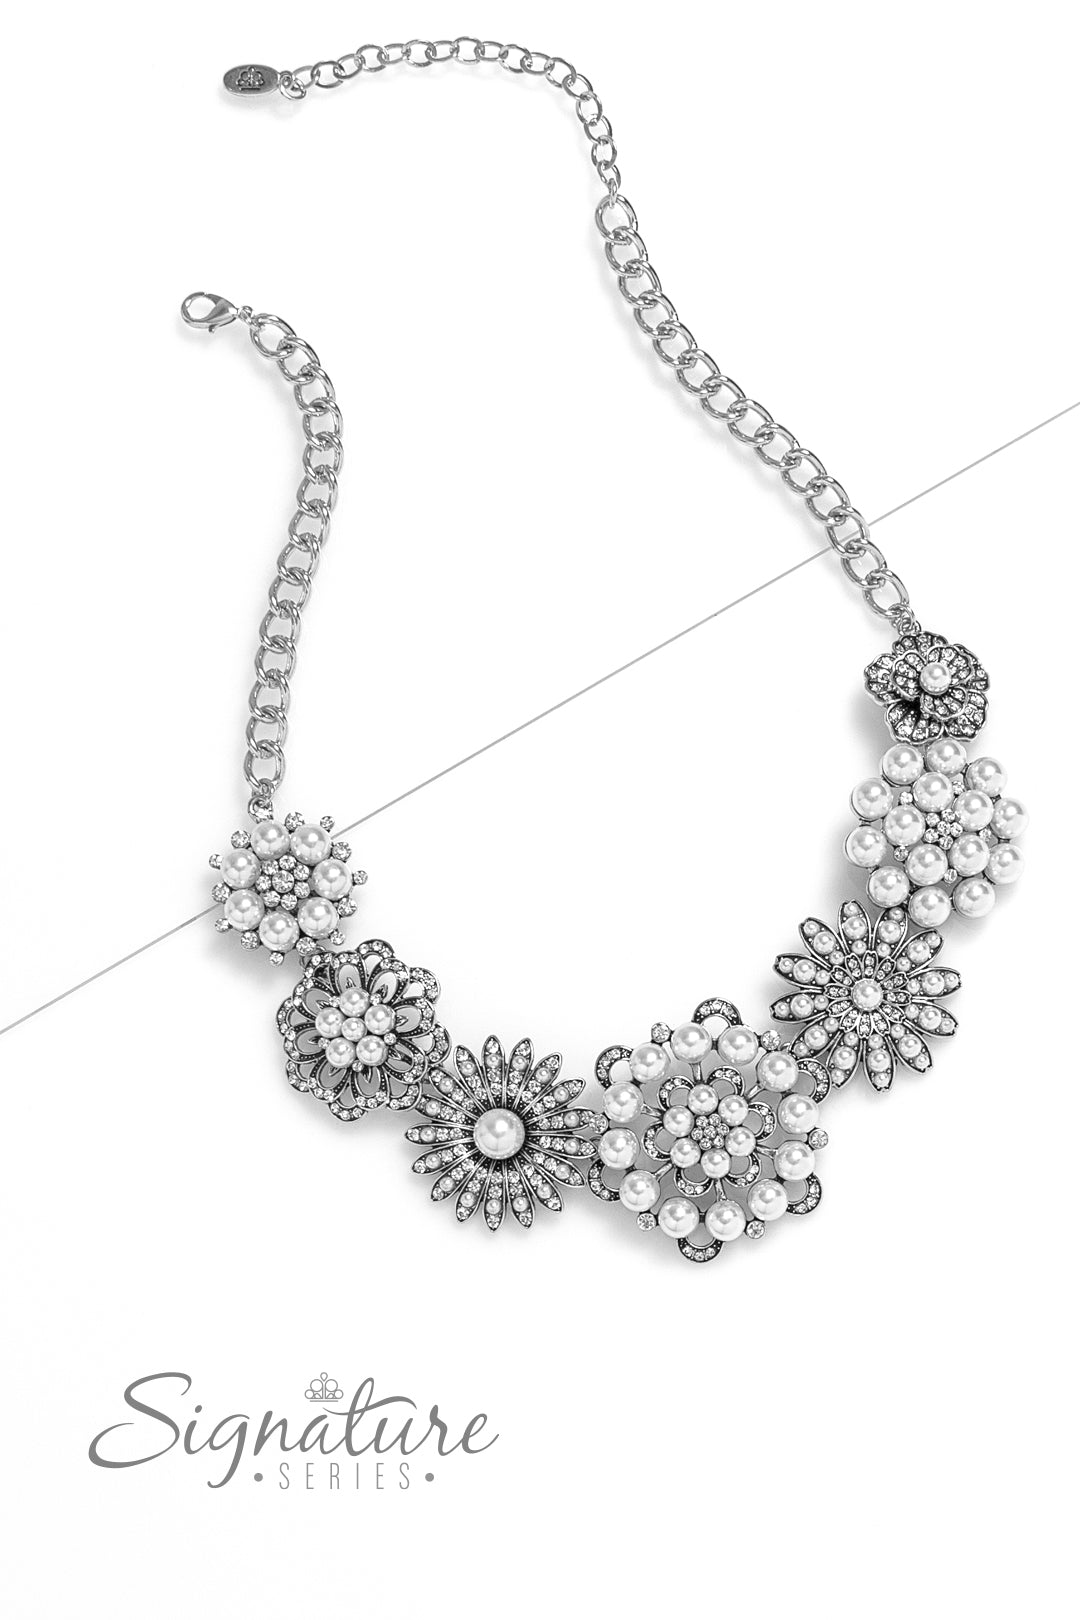 Polished white pearls and brilliant white rhinestones bloom atop a framework of silver, forming seven unique flowers adorned in dizzying detail. Each flower features a unique centerpiece encircled by silver petals lined with luminescence and intricate detail. The flourish of florals links whimsically along the neckline, resulting in an unforgettable statement piece that sparkles with sentiment. Features an adjustable clasp closure.  Sold as one individual necklace. Includes one pair of matching earrings.